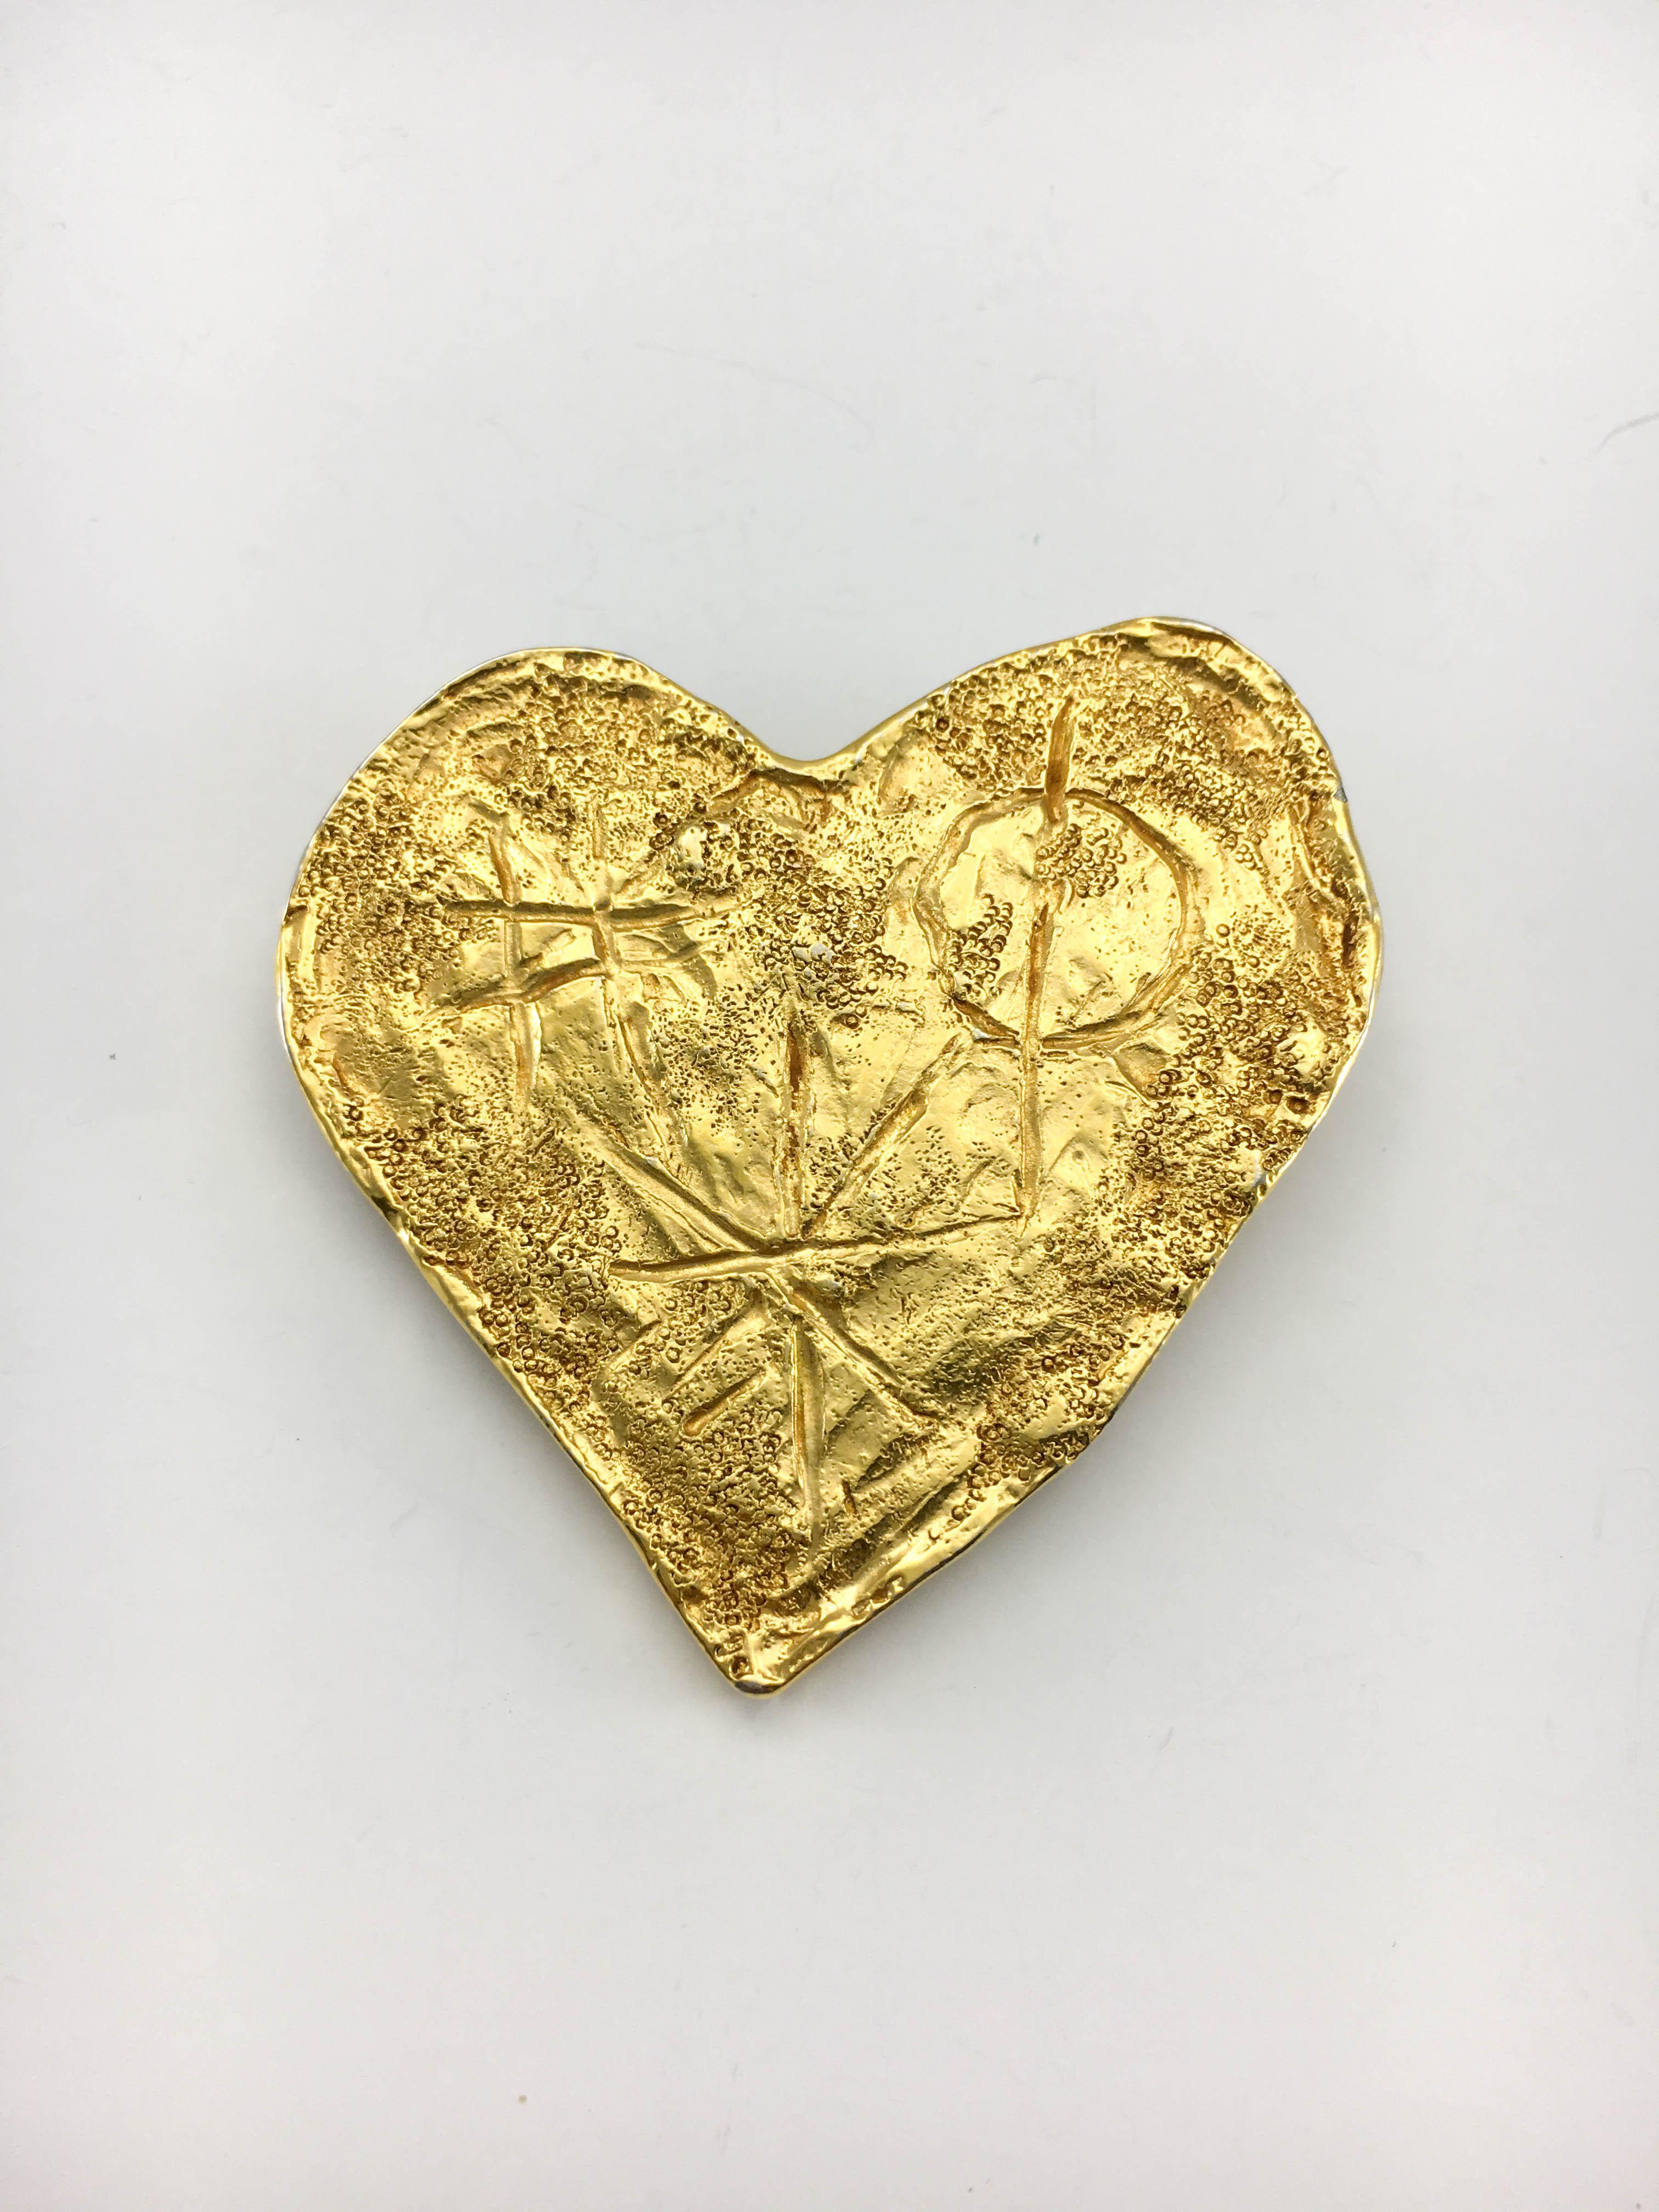 1994 Lacroix Gold-Plated Modernist Heart Brooch, by Goossens In Excellent Condition For Sale In London, Chelsea